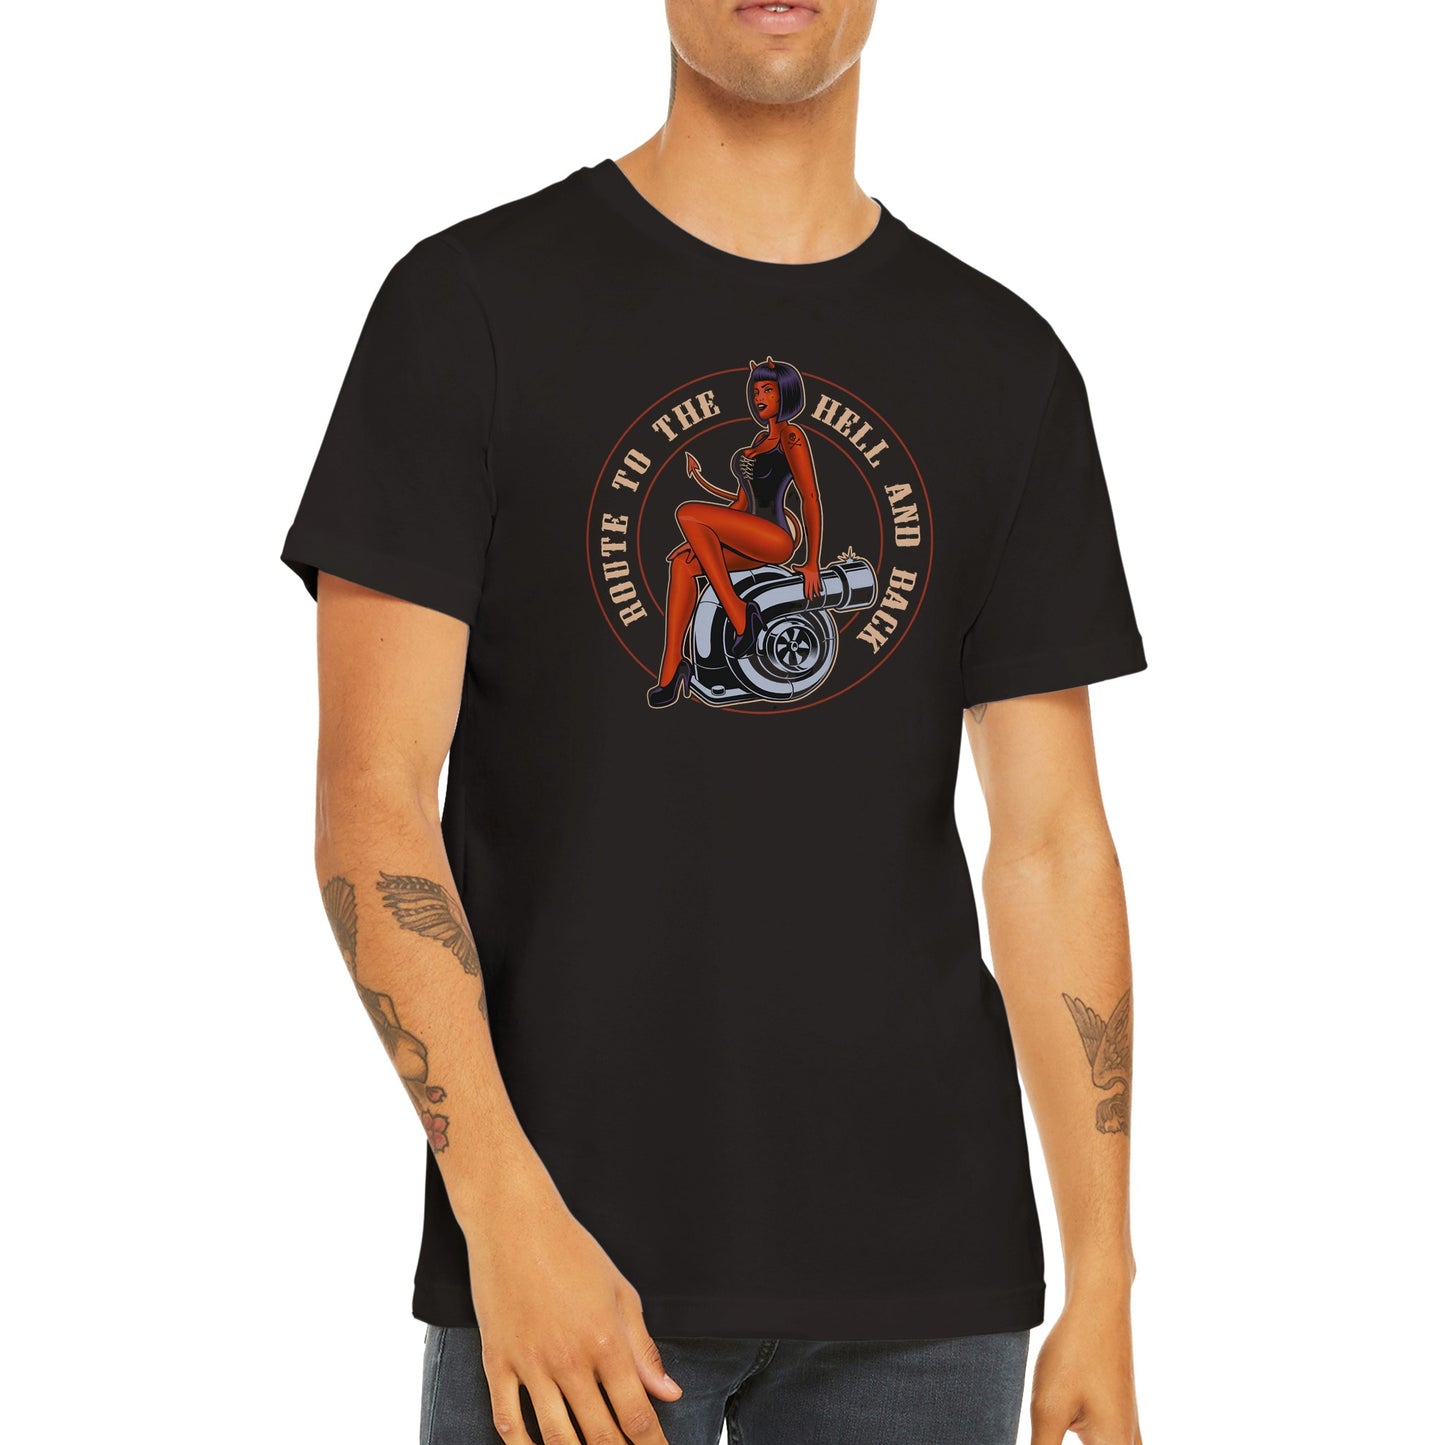 Route to Hell T-shirt